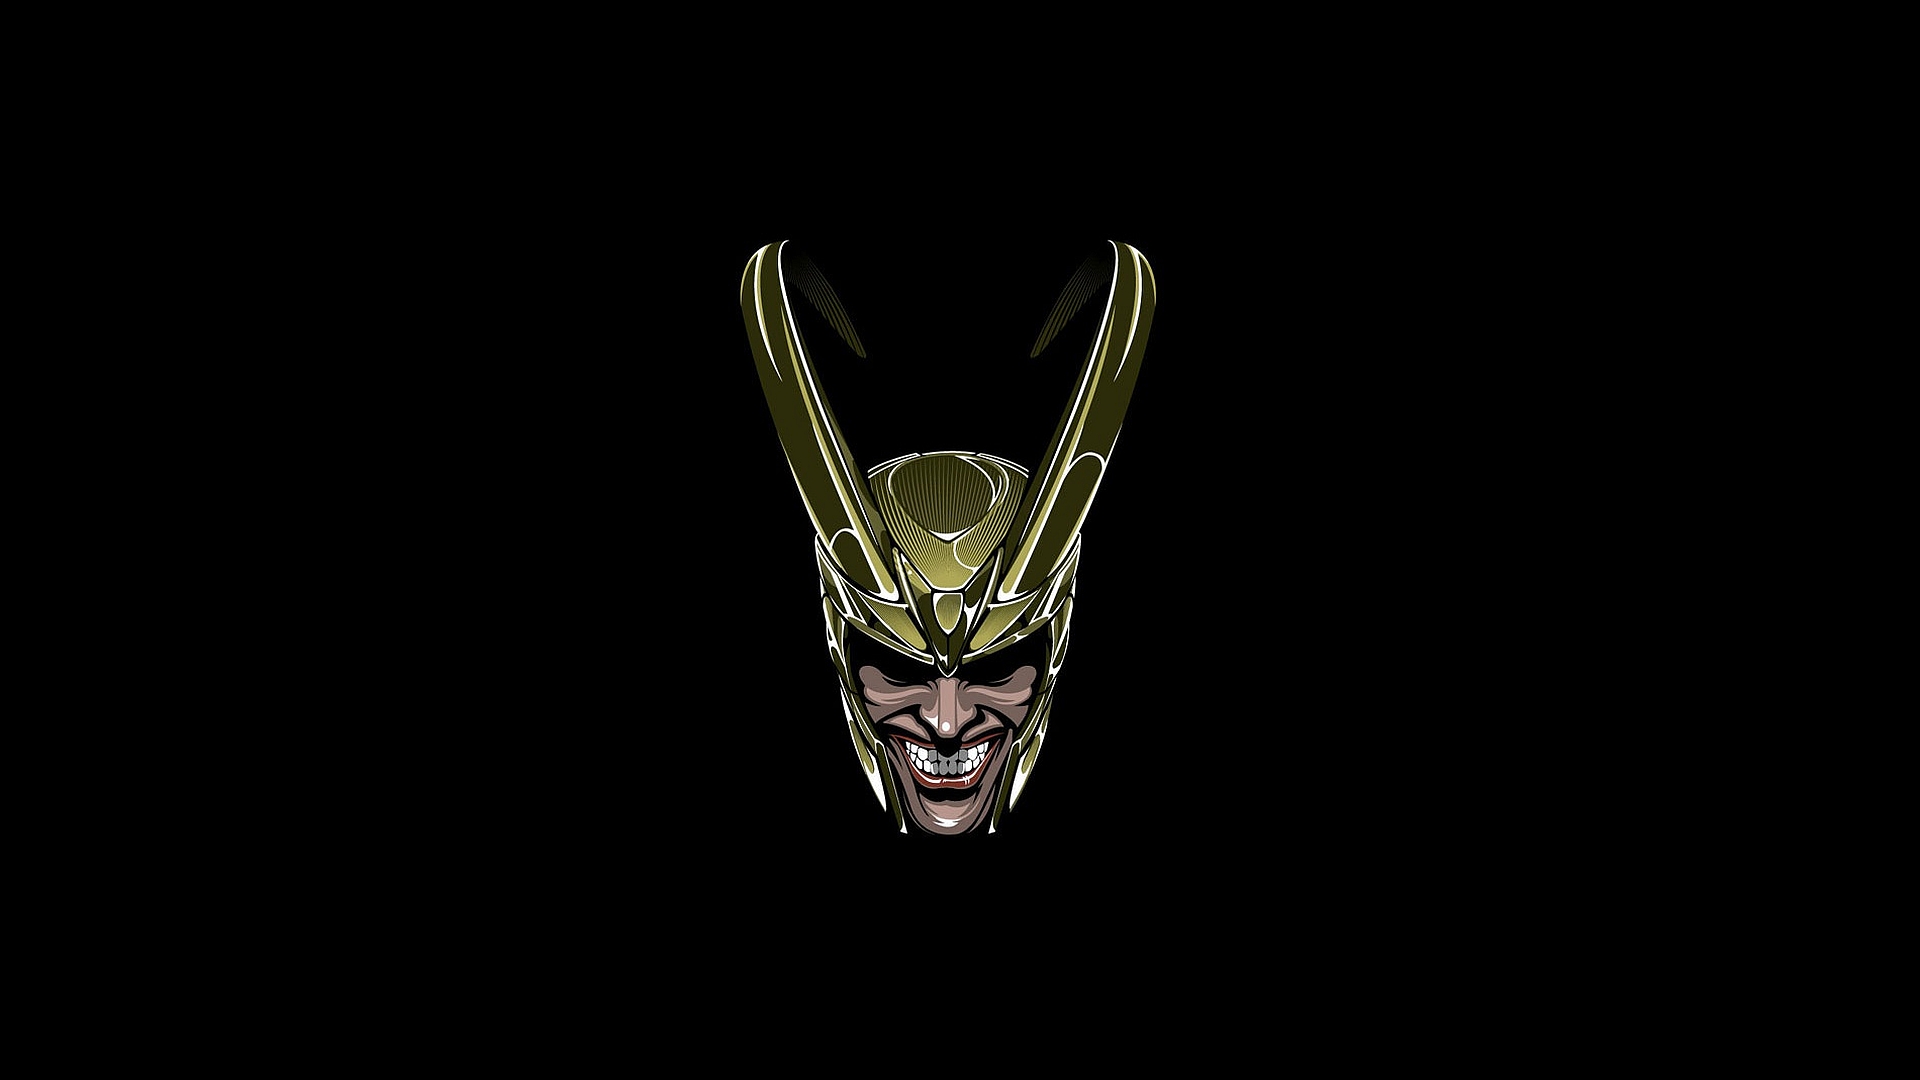 180+ Loki (Marvel Comics) HD Wallpapers and Backgrounds